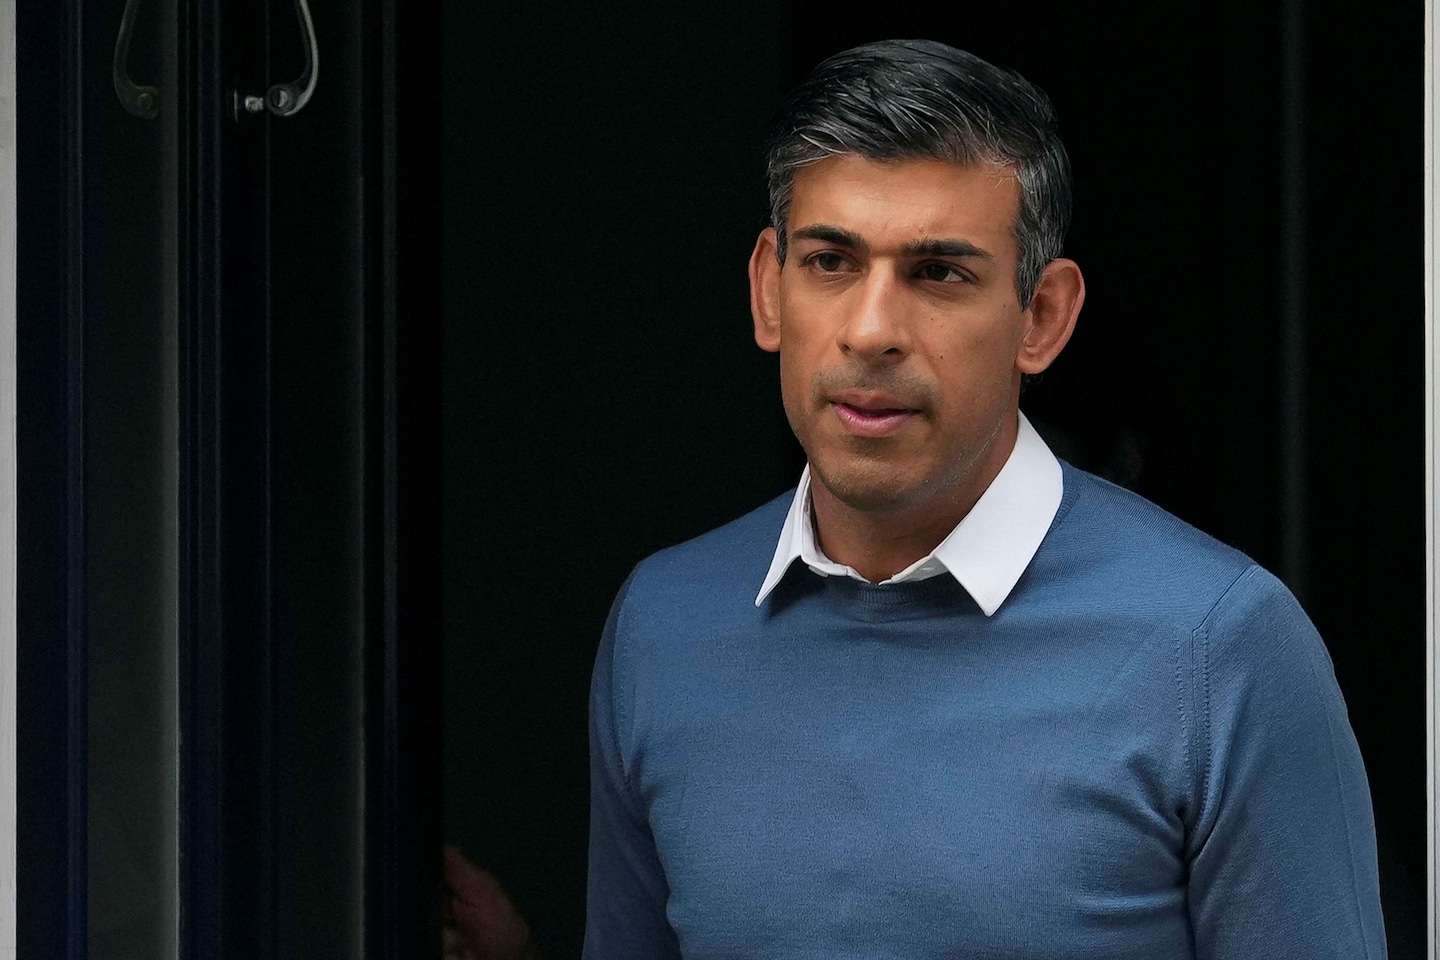 Rishi Sunak officially joins race to be U.K. prime minister